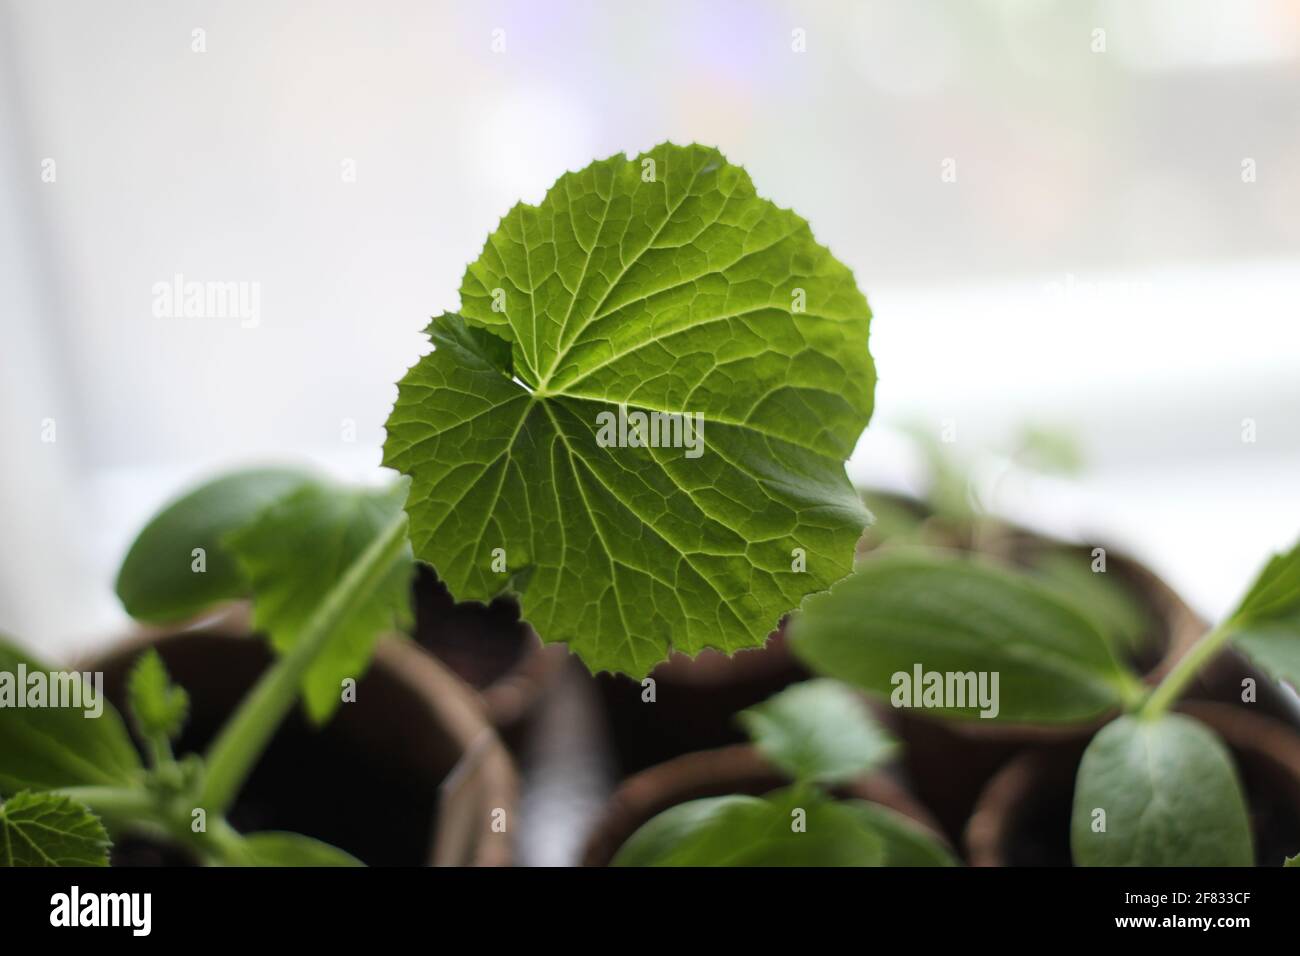 Leaves of a young cucumber plant as a close up Stock Photo